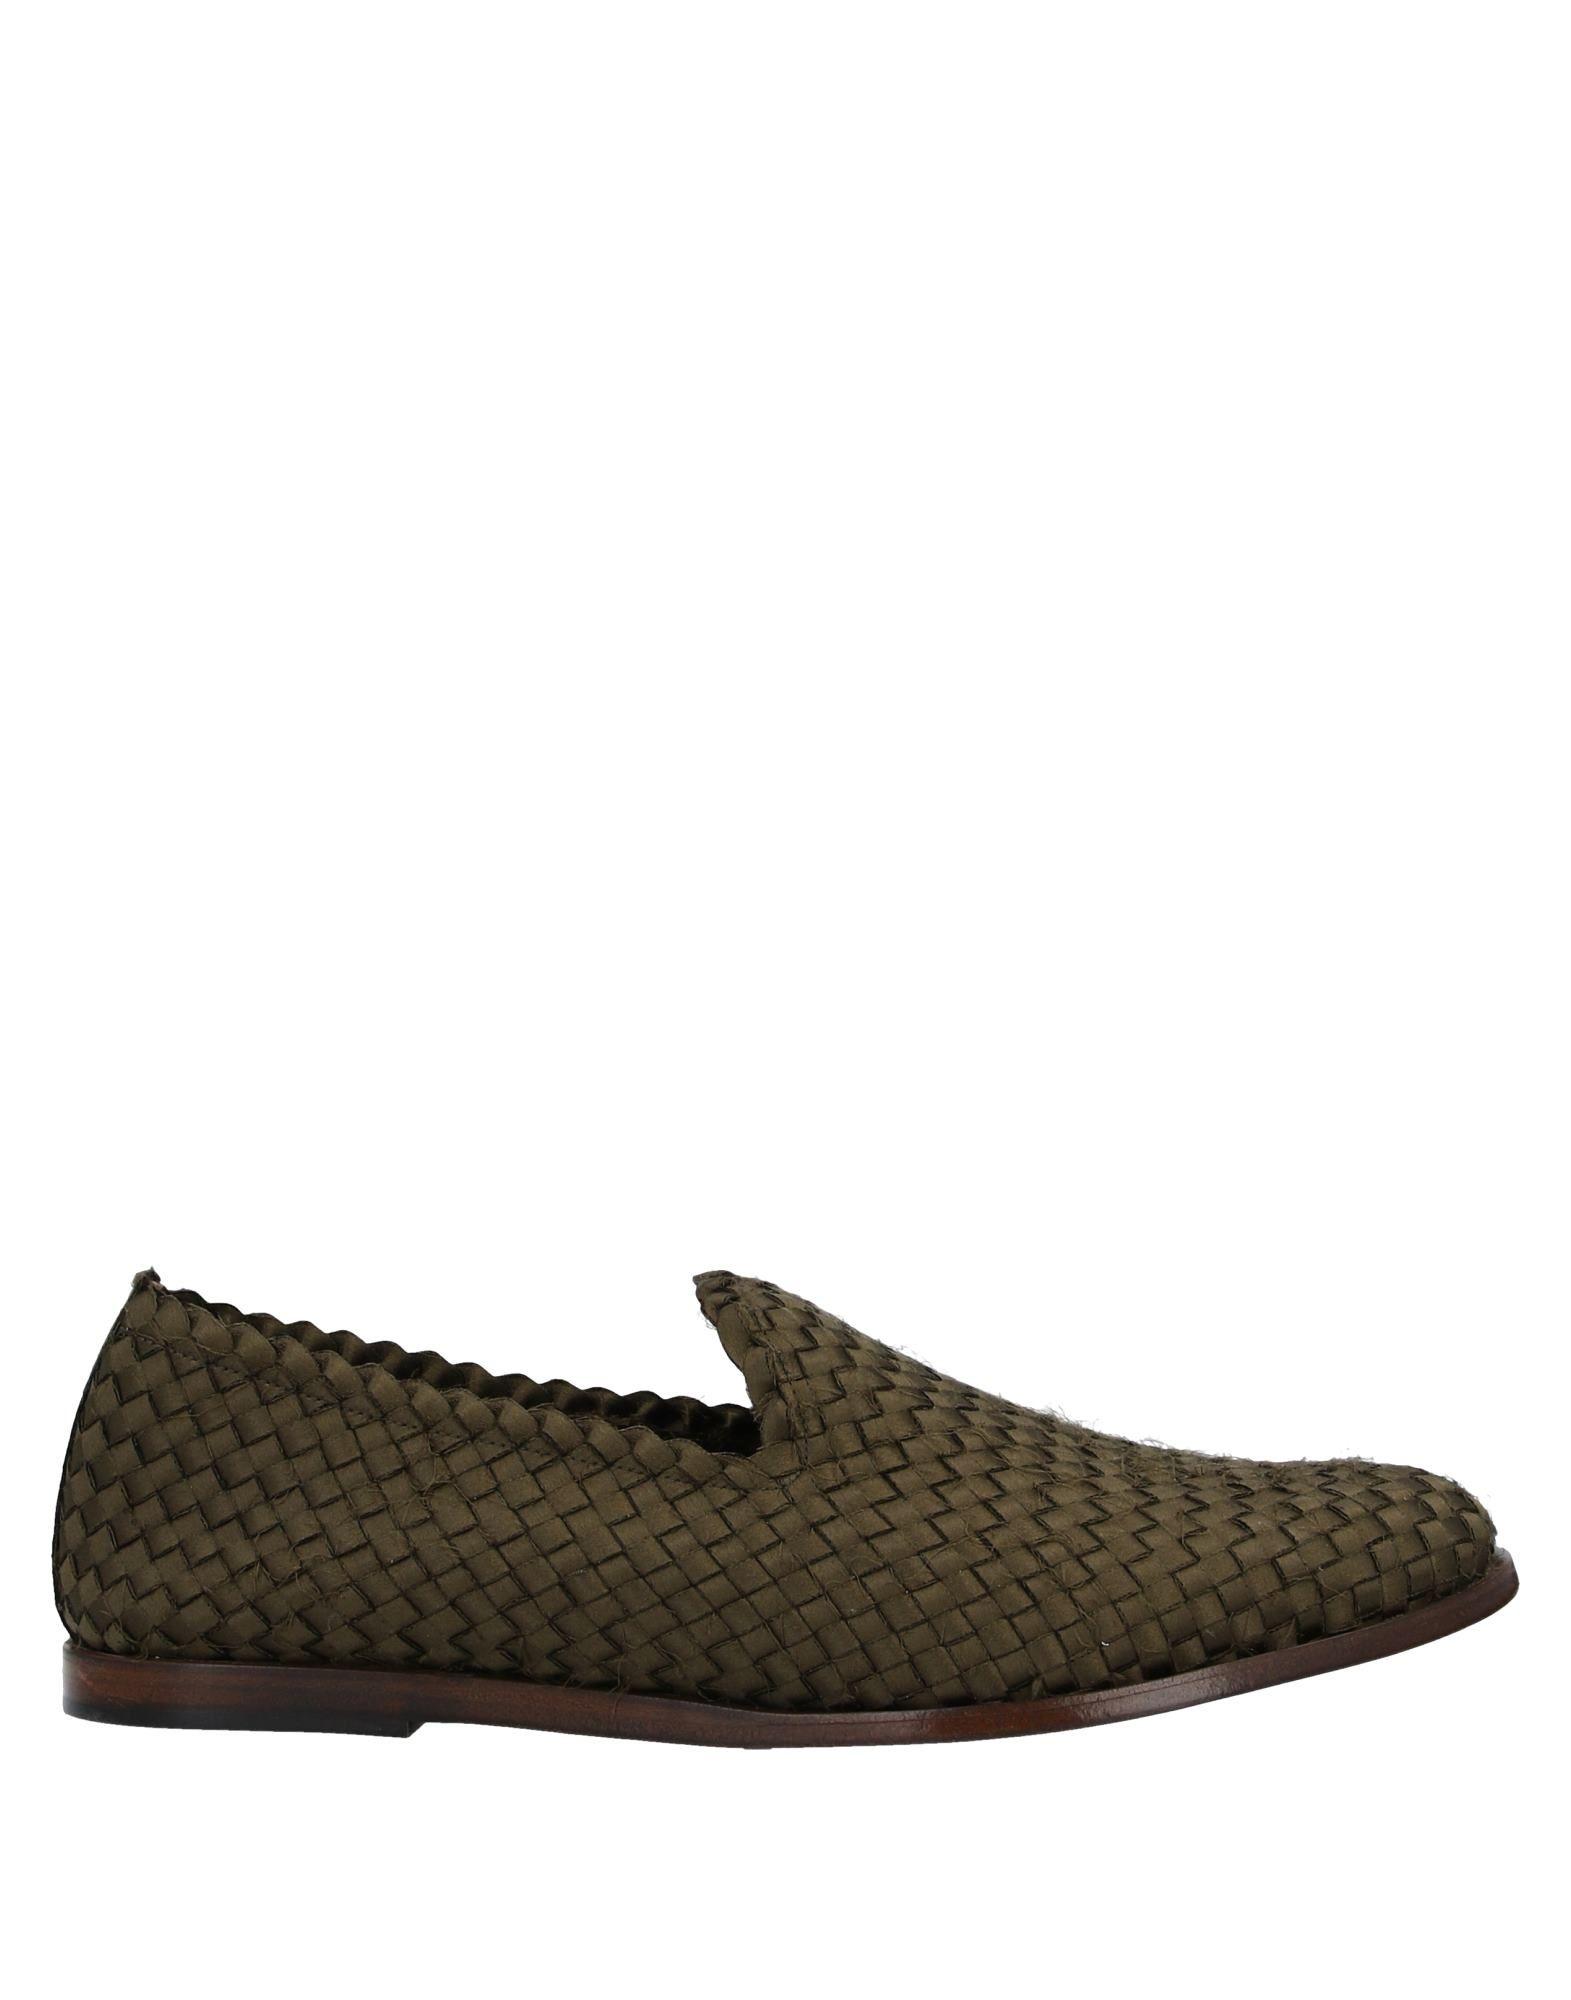 Pedro Garcia Leather Loafer in Military Green (Green) - Lyst